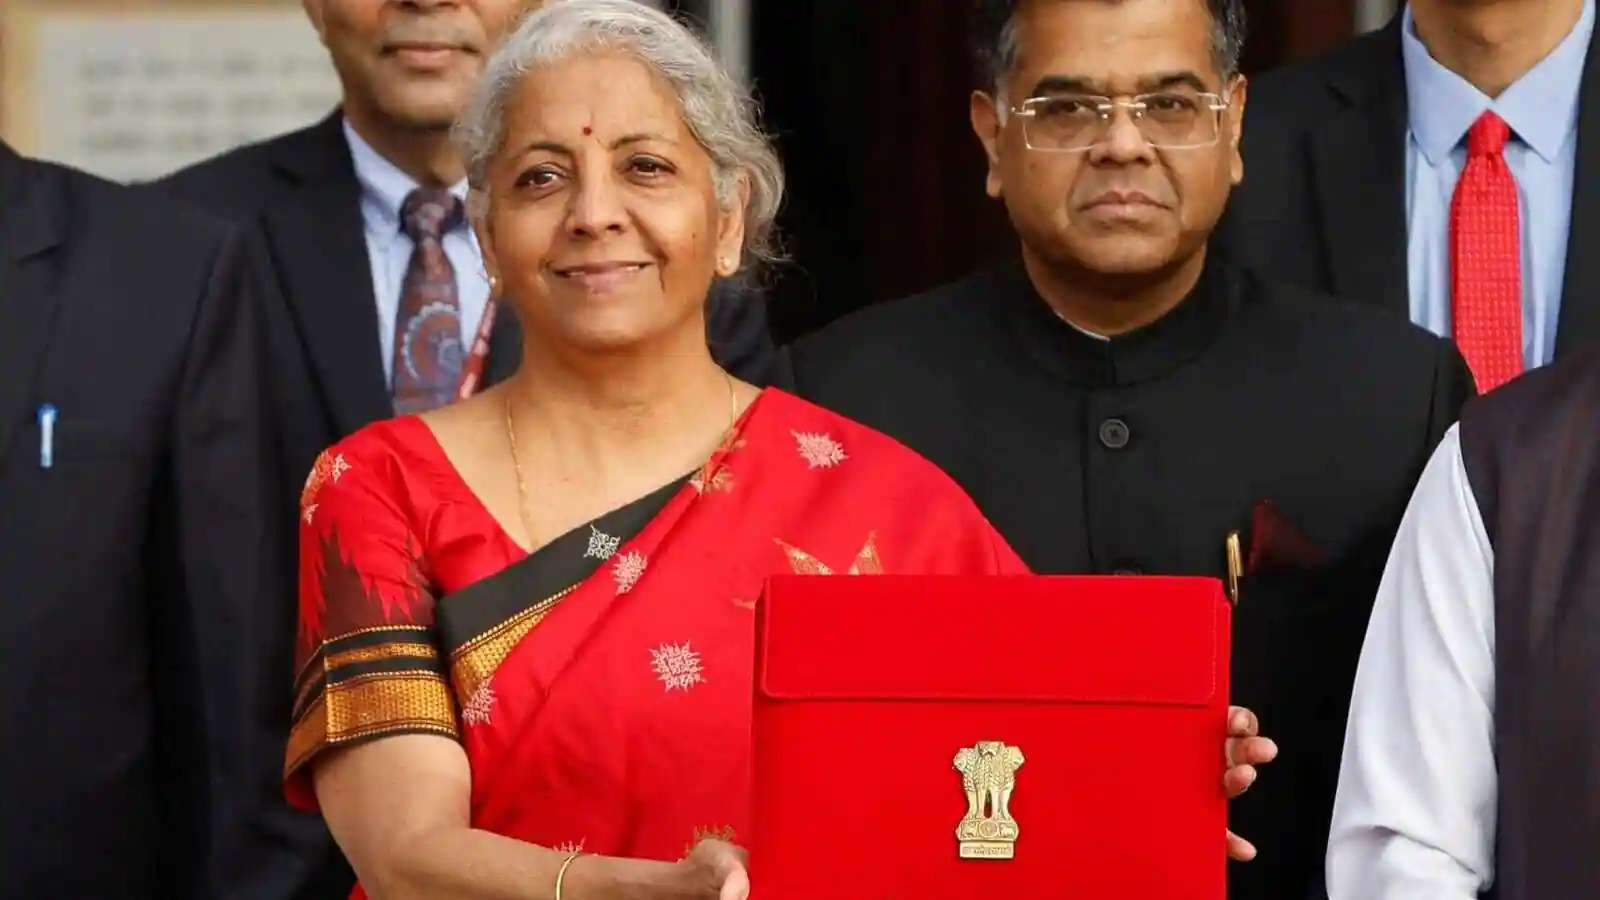 Union Budget 2023-24, The Budget issues fund for Women and Child Development ministry